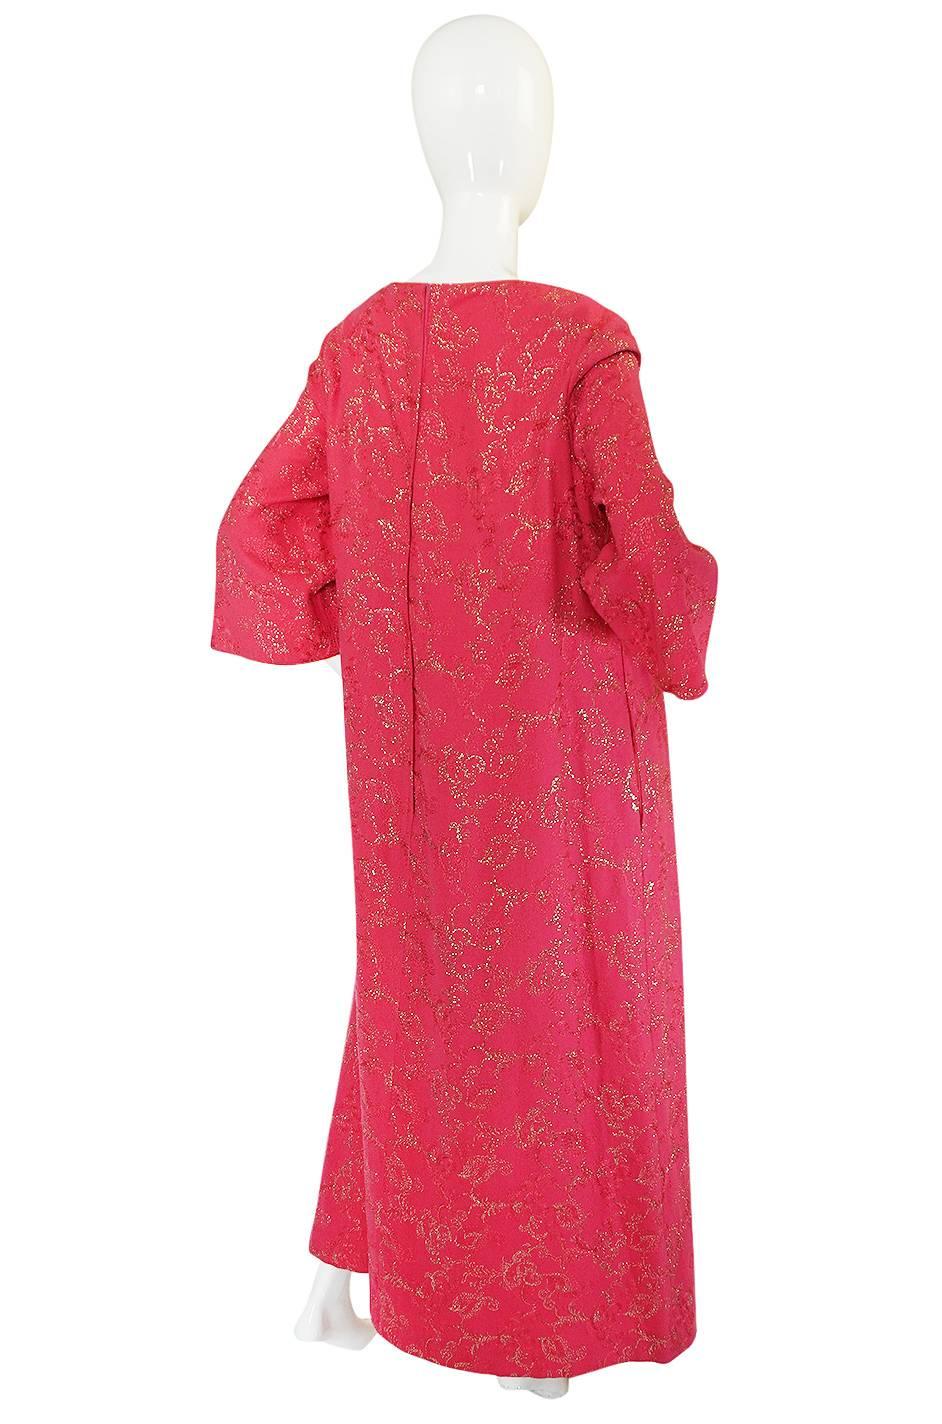 

This caftan dress is just amazing. It's made of a beautiful pink very light wool mix upon which are two patterns - one embroidered in a matching pink thread and the other in a gold lame thread. The effect of the gold on the pink is stunning and